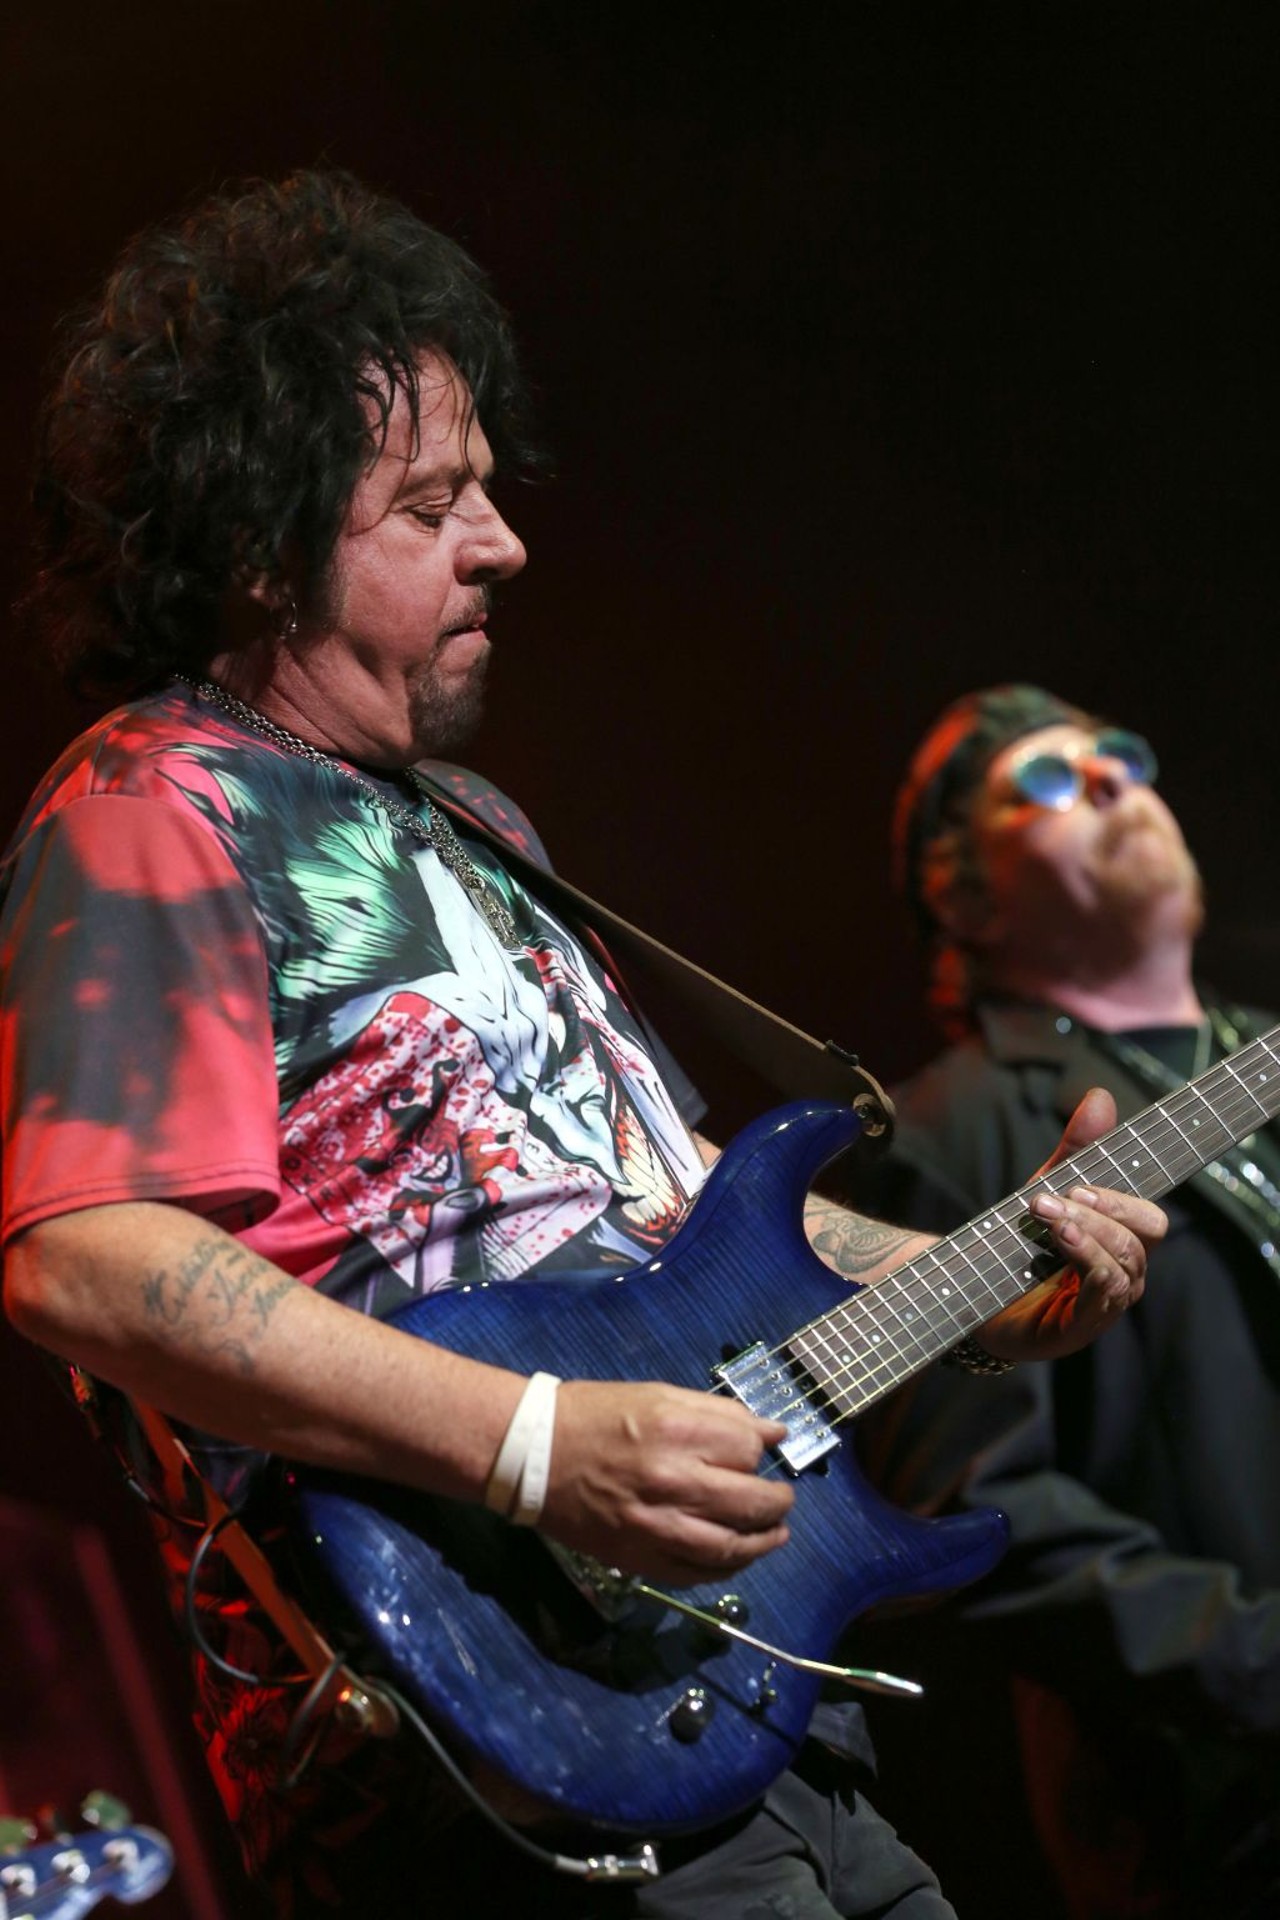 Photos from Toto in concert at Hard Rock Live Orlando